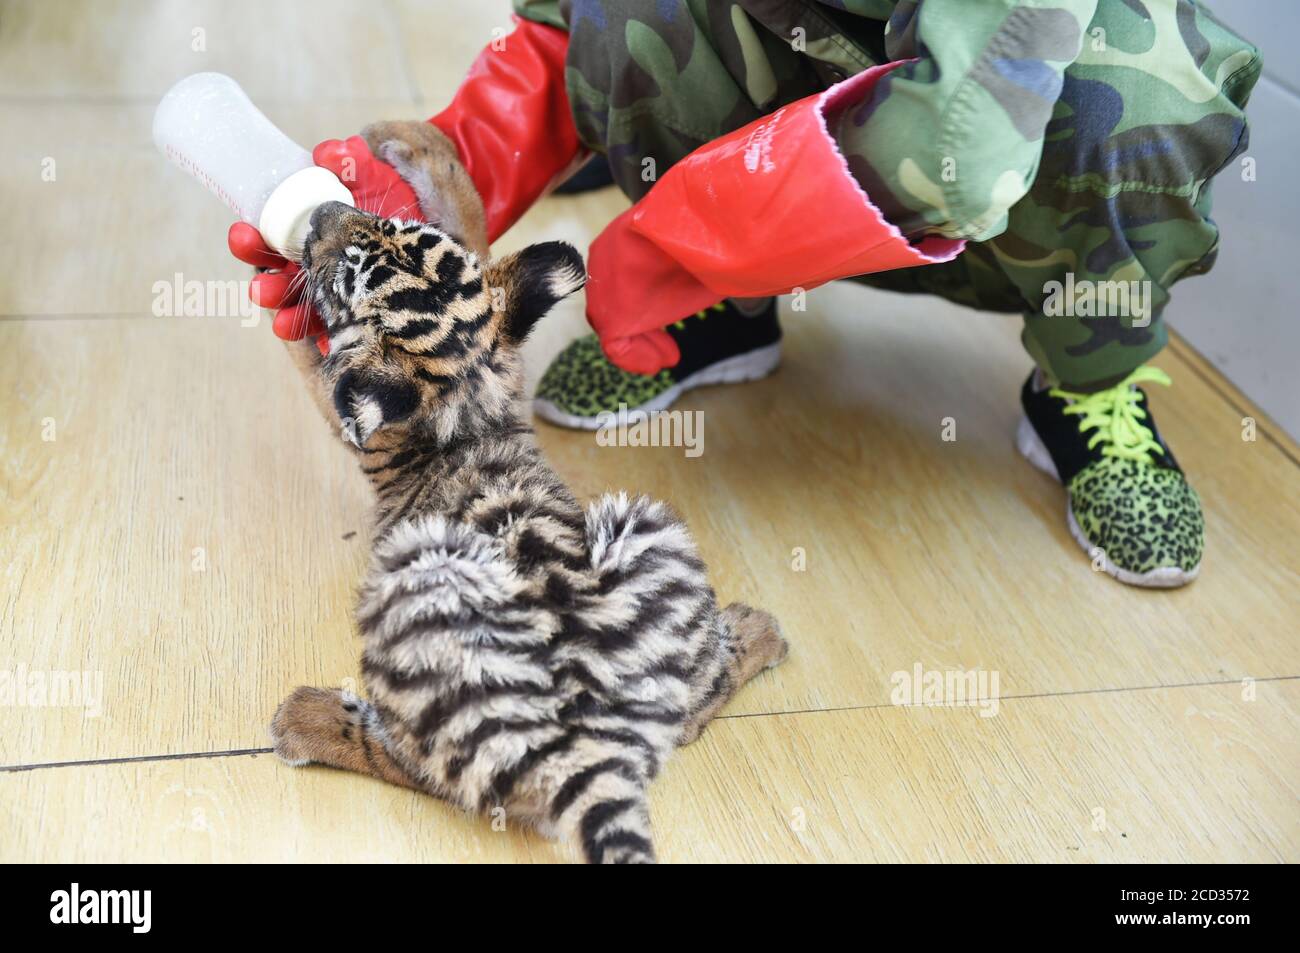 Three South China tiger cubs were born in April in China's primary zoo housing the rare species, bringing the total number of such tigers in the zoo t Stock Photo